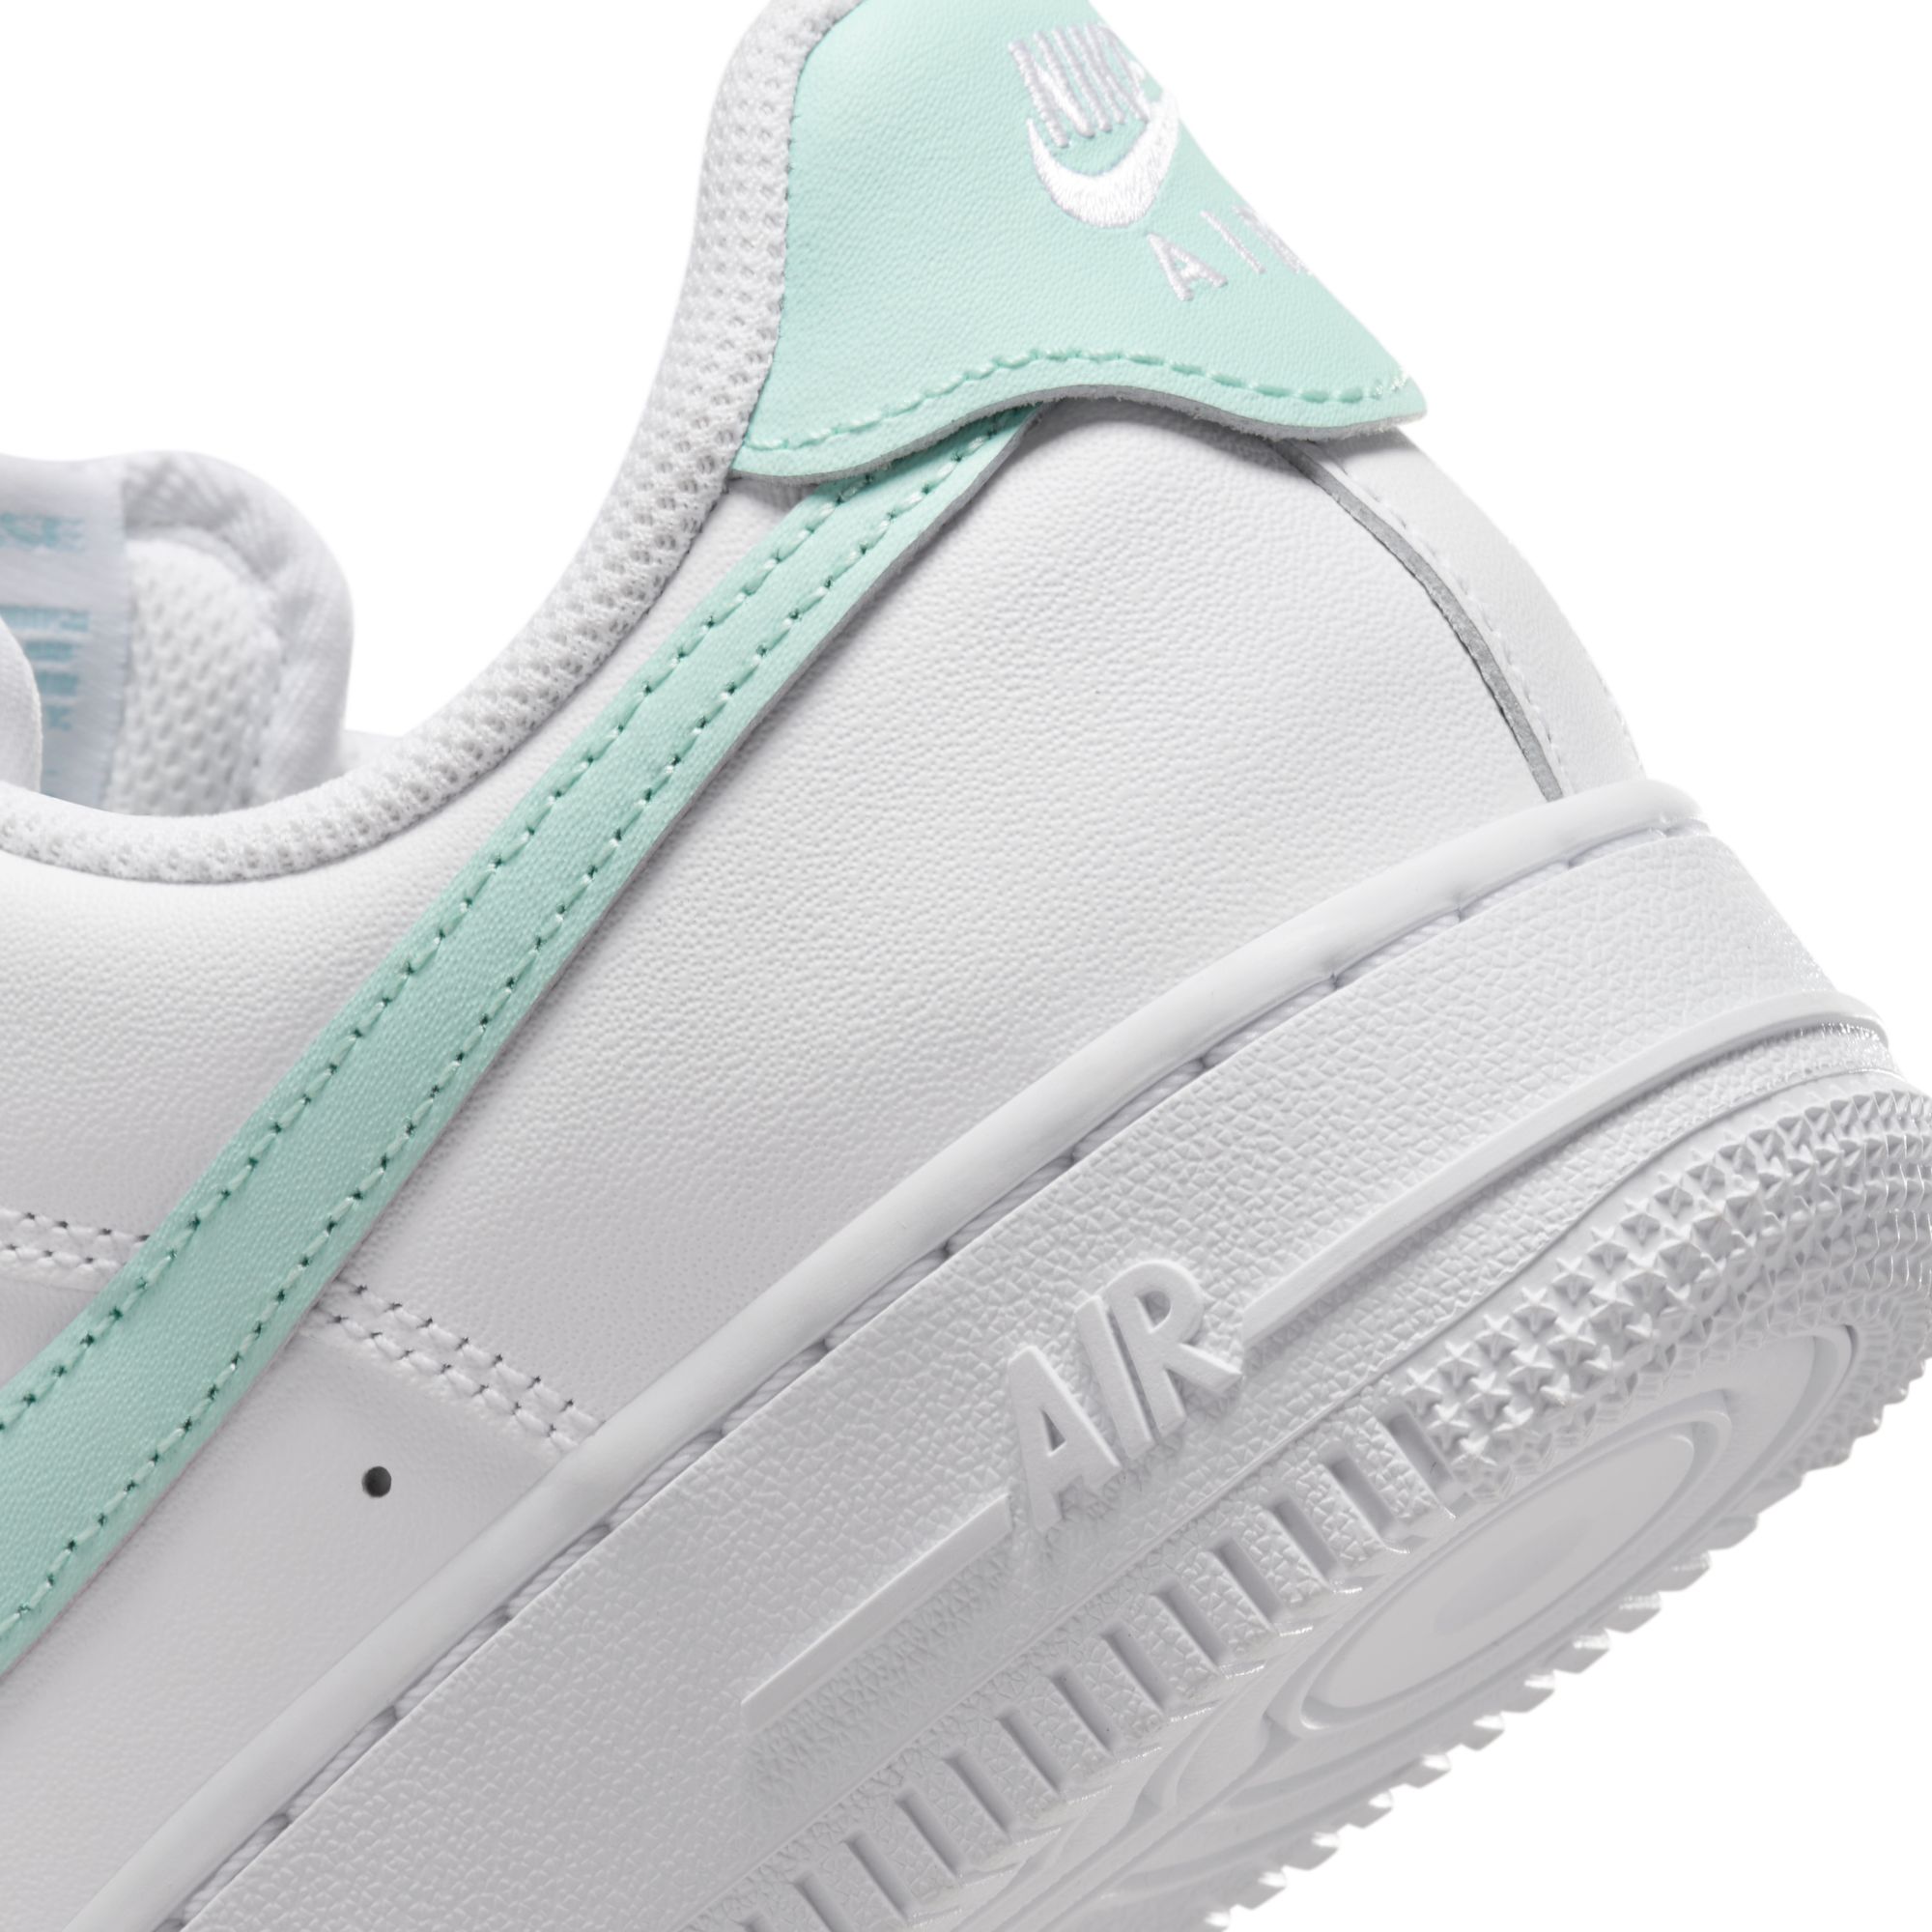 GIÀY NIKE NỮ AIR FORCE 1 07 EASYON WHITE ICE JADE WOMENS SHOES DX5883-101 7